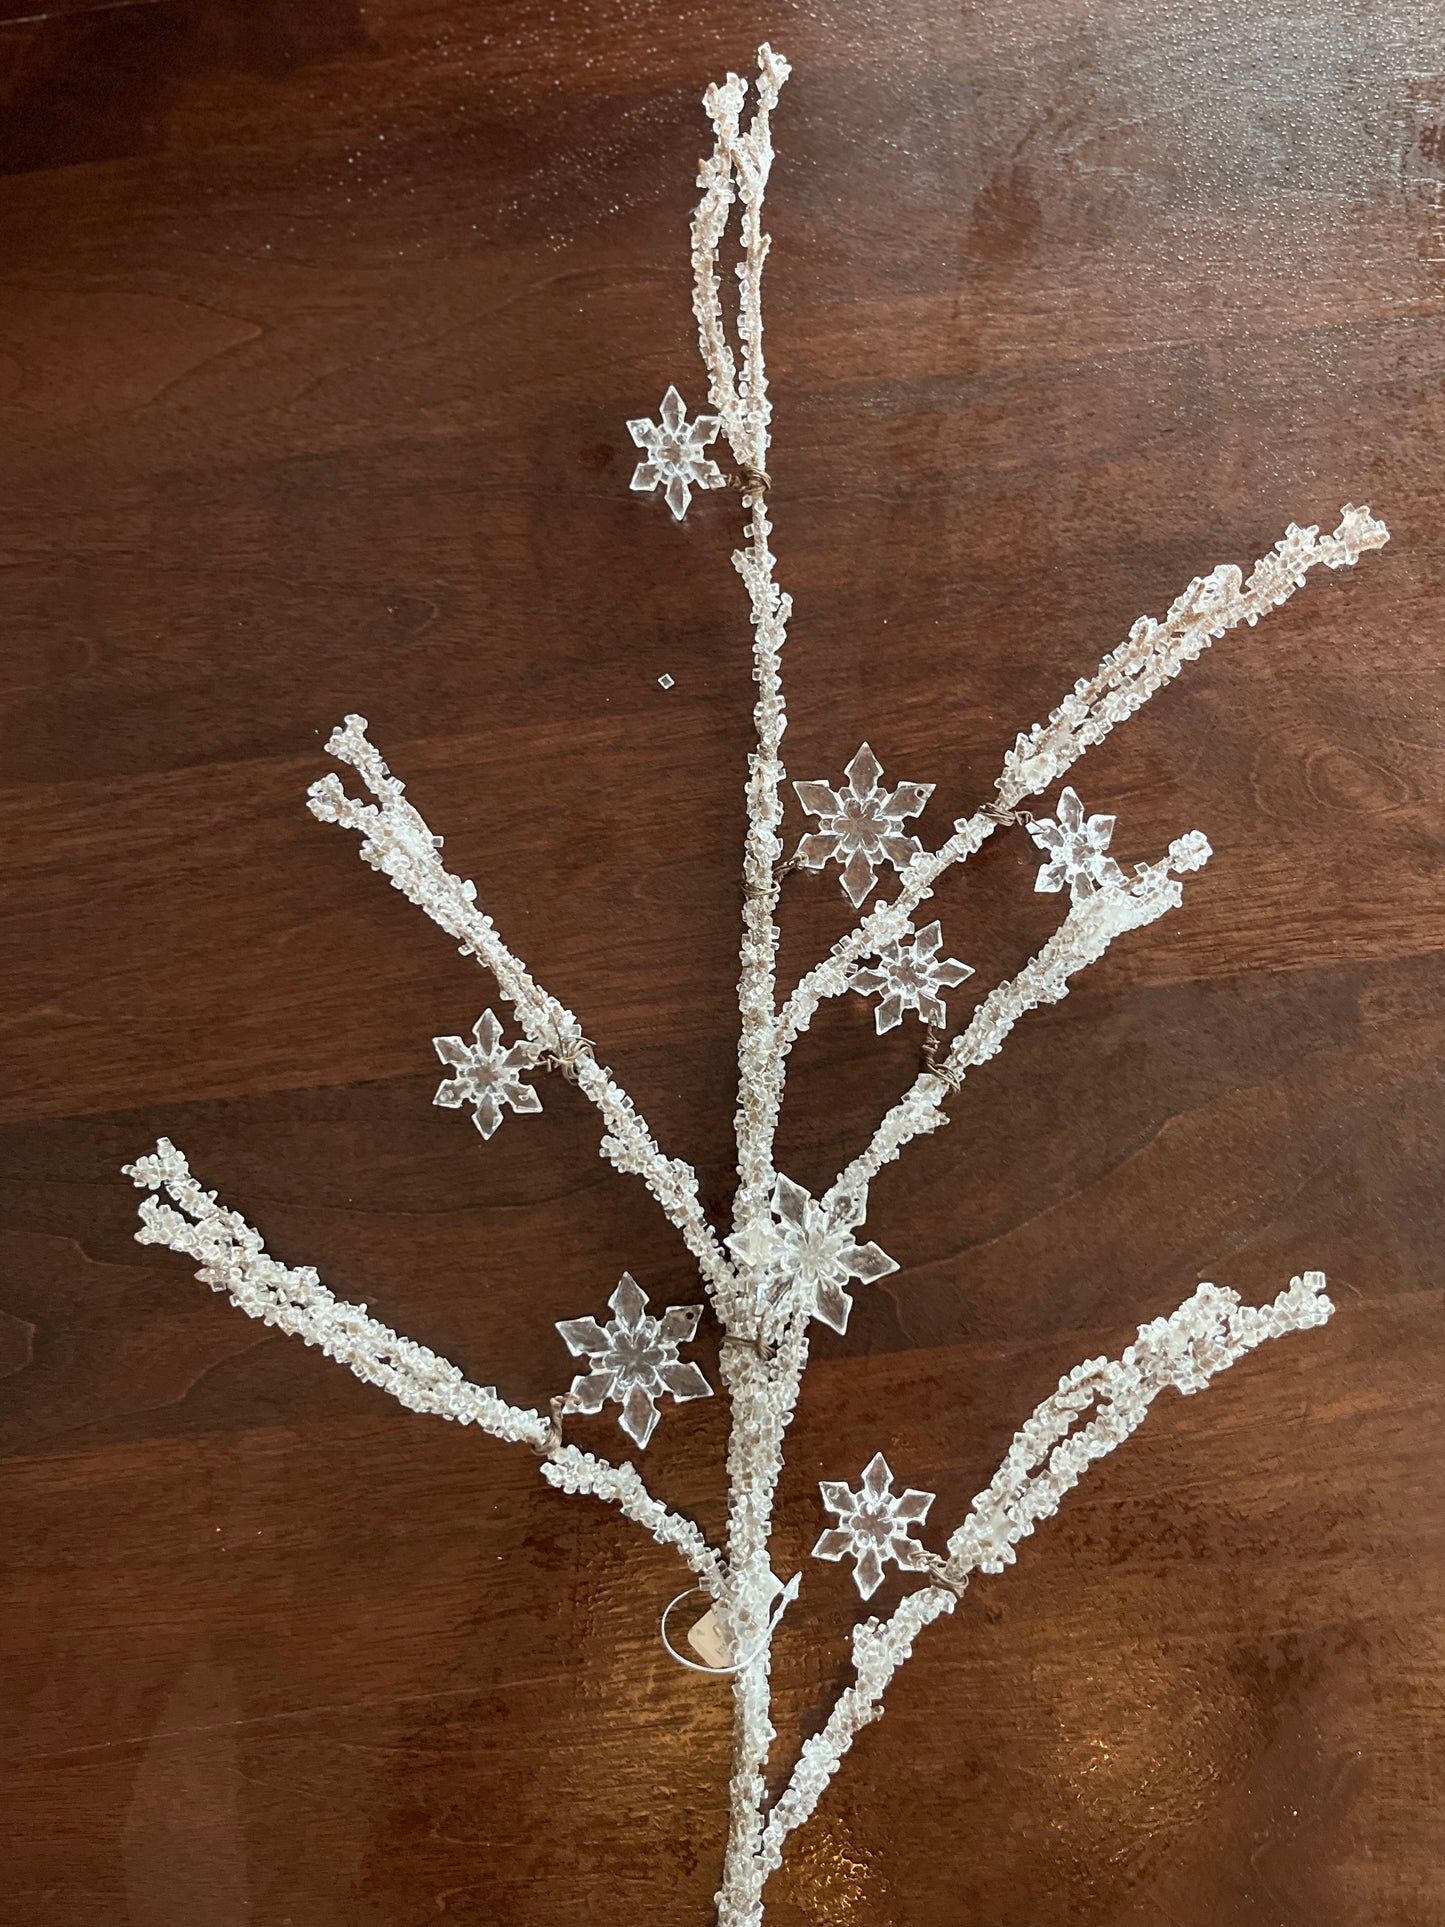 Icy Branch with Snowflakes